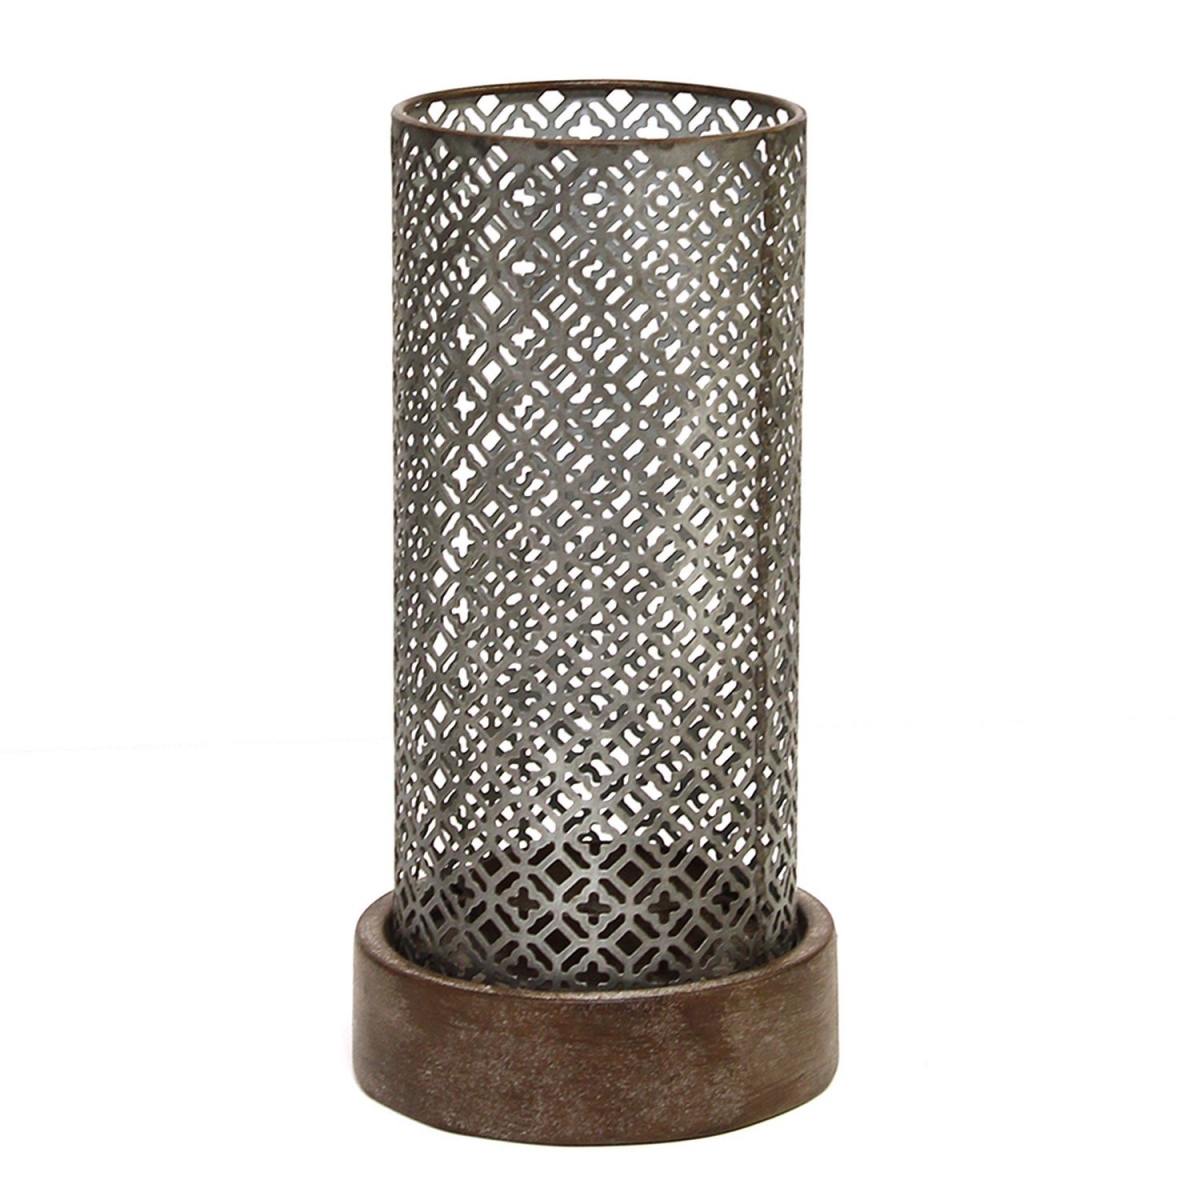 Home Roots Beddings 331480 Moroccan Hurricane Candle Holder, Grey & Wood